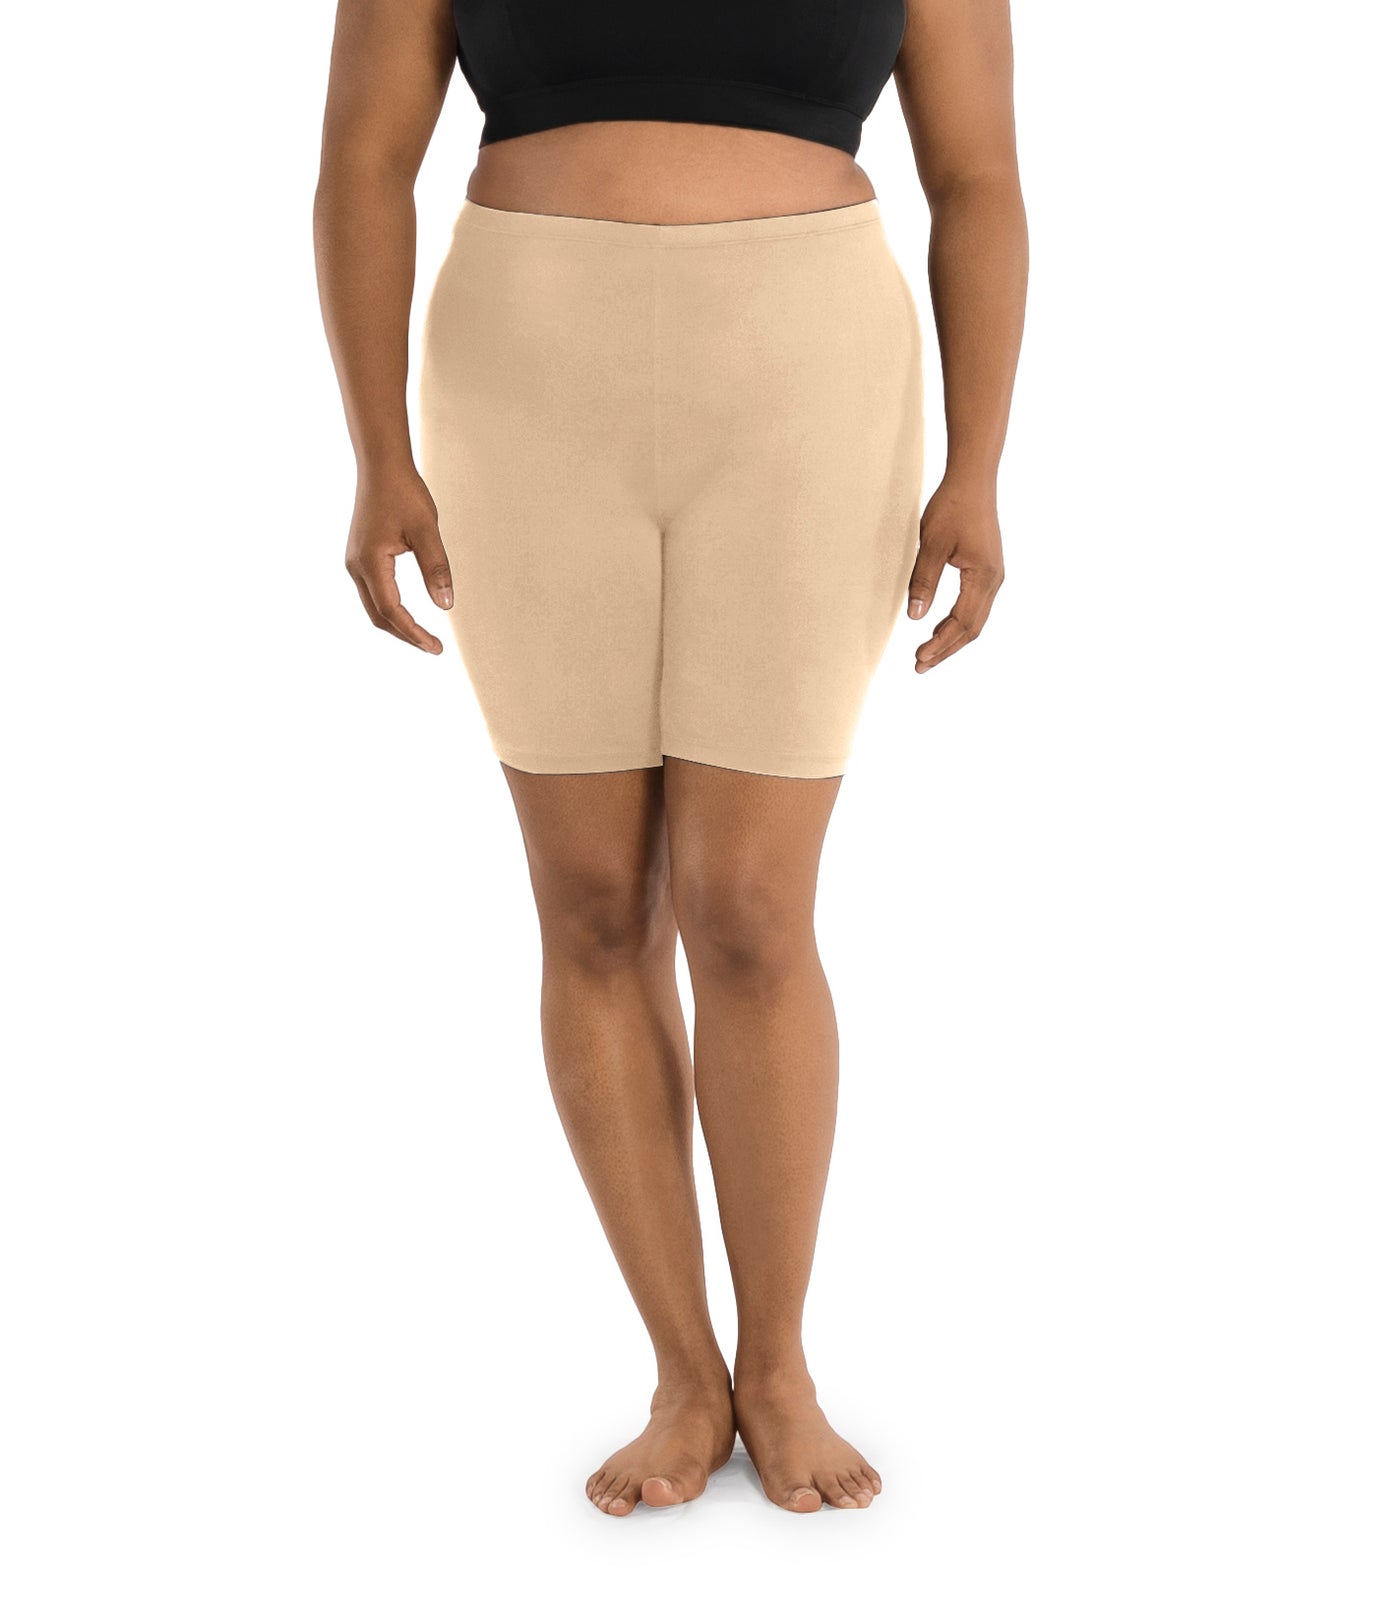 Plus size woman wearing JunoActive's hush full fit boxer in color ecru. Model is facing forward with hands to her front with hands by her side.